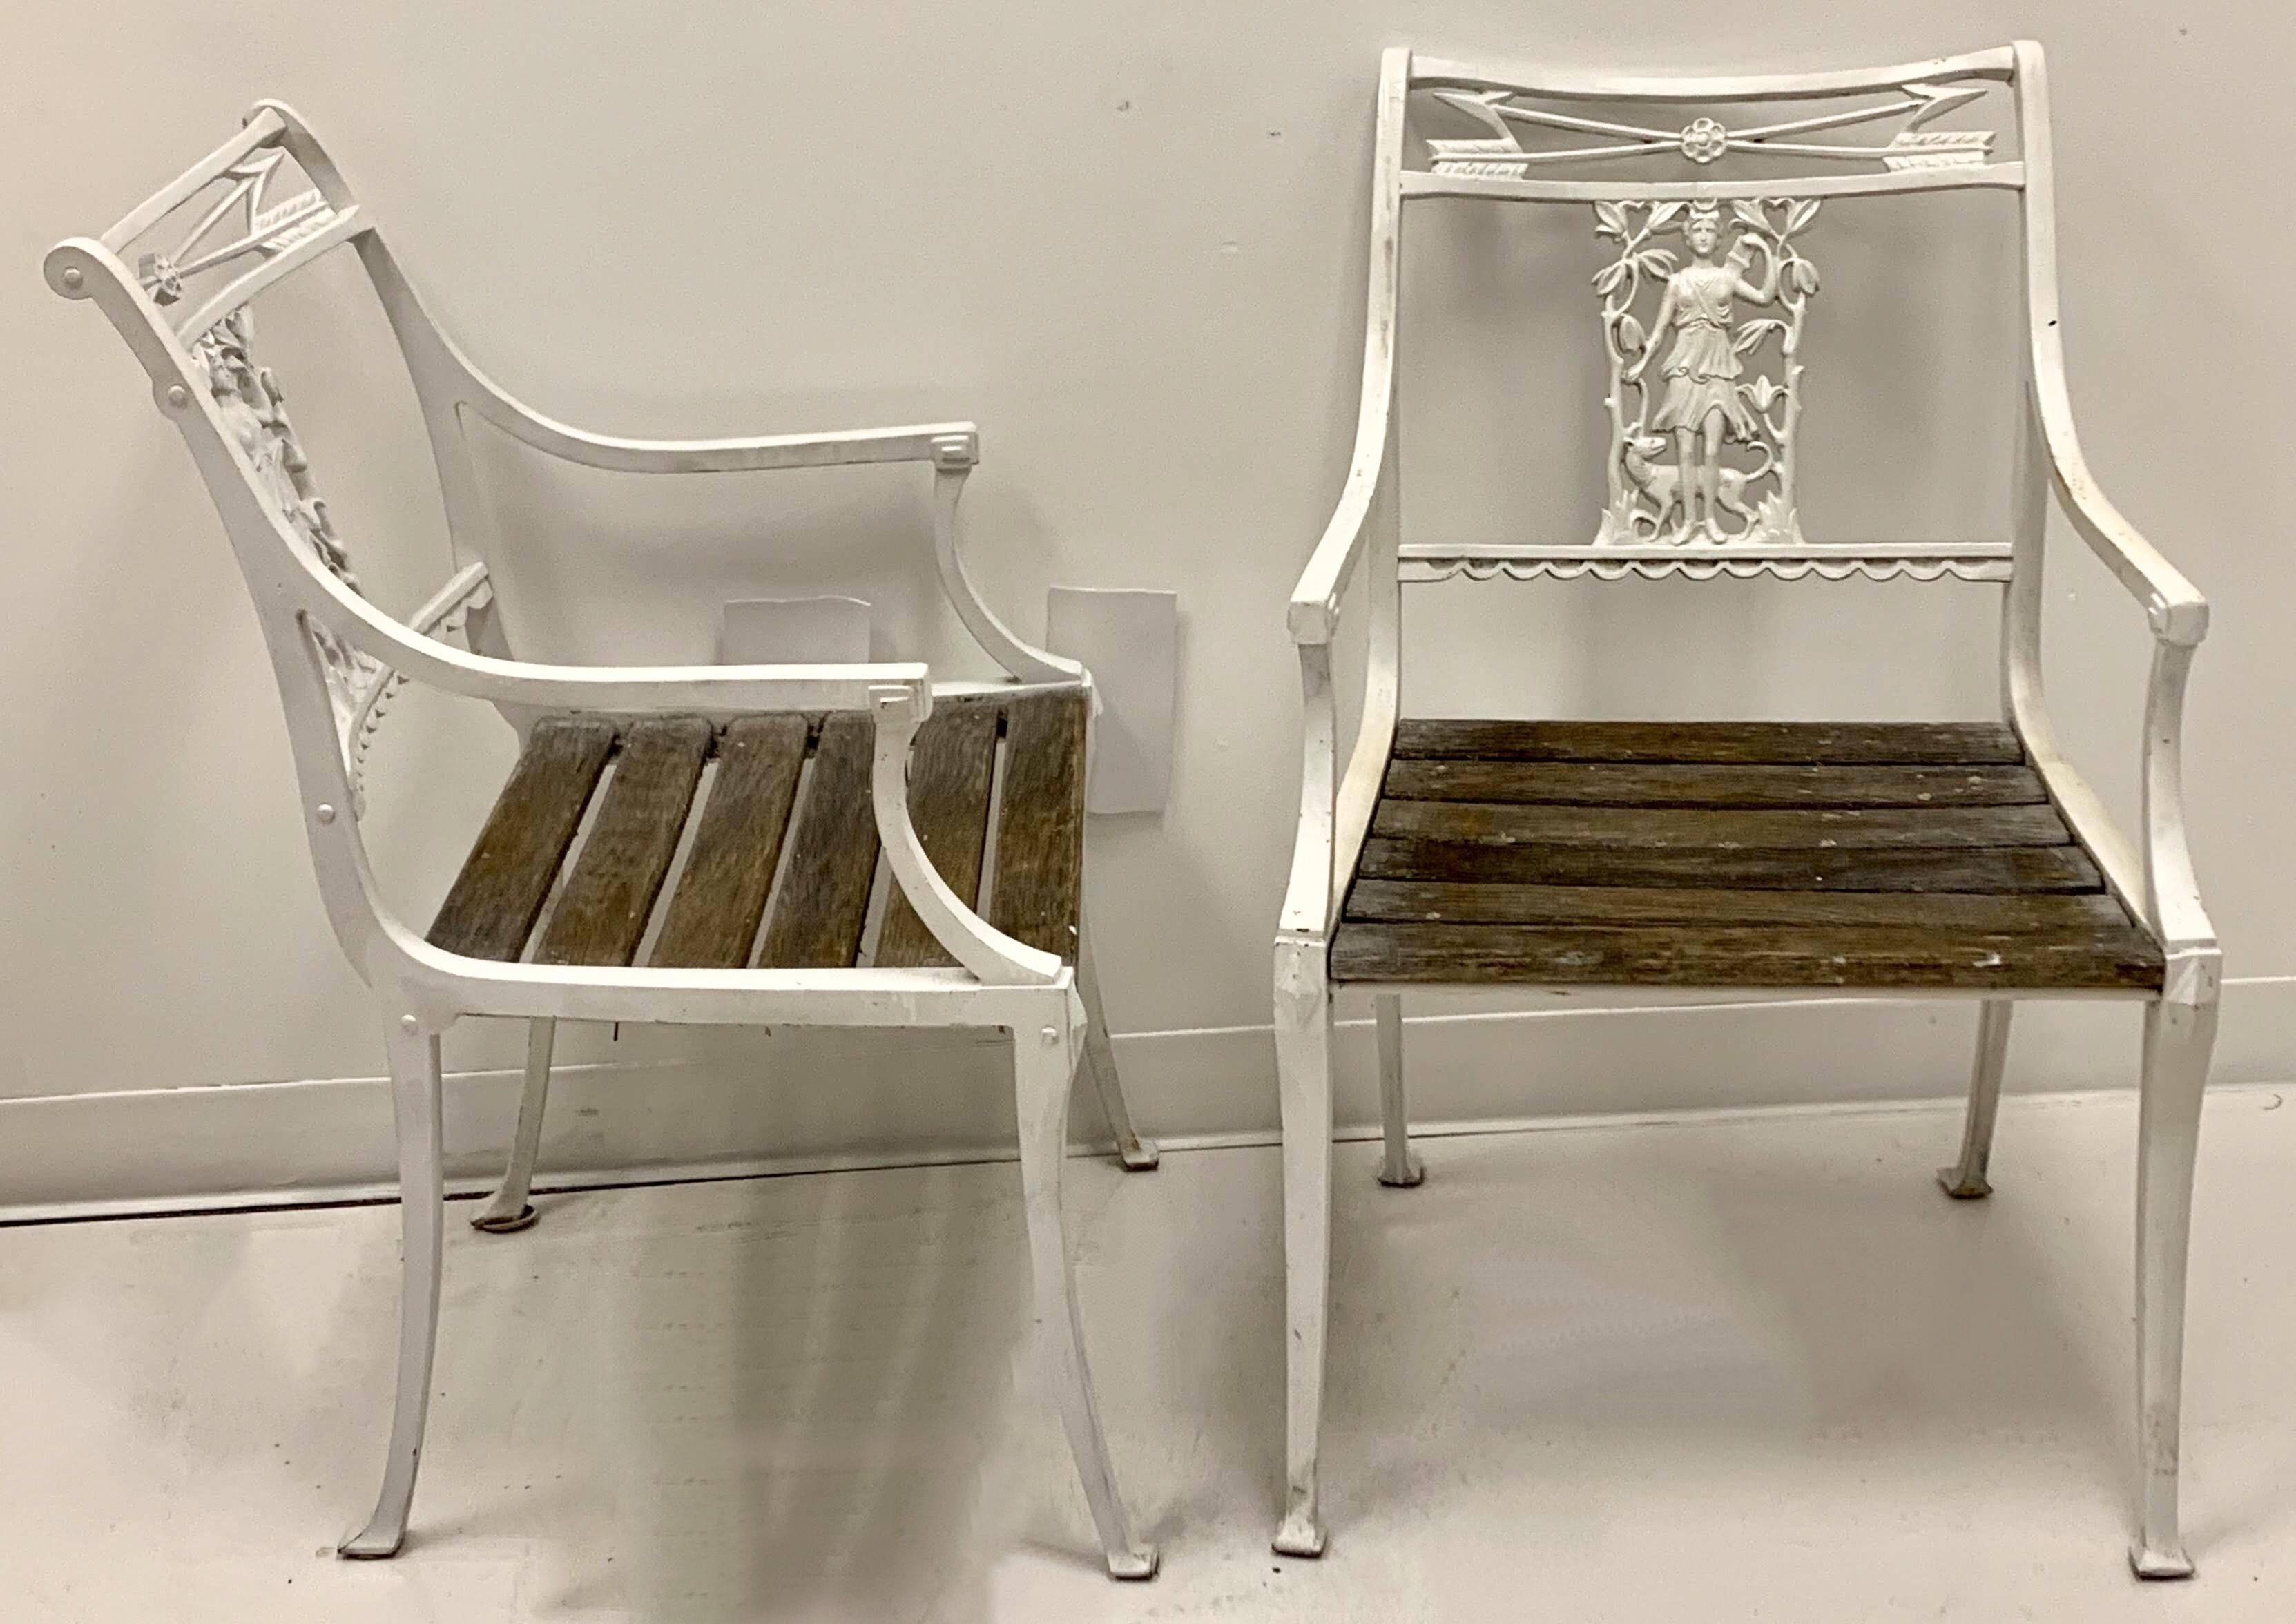 This is an early 20th century pair of neoclassical style iron chairs by the Molla Foundry, which was produced in England and New York. They have the original slats, and are in garden condition. They are extremely heavy.